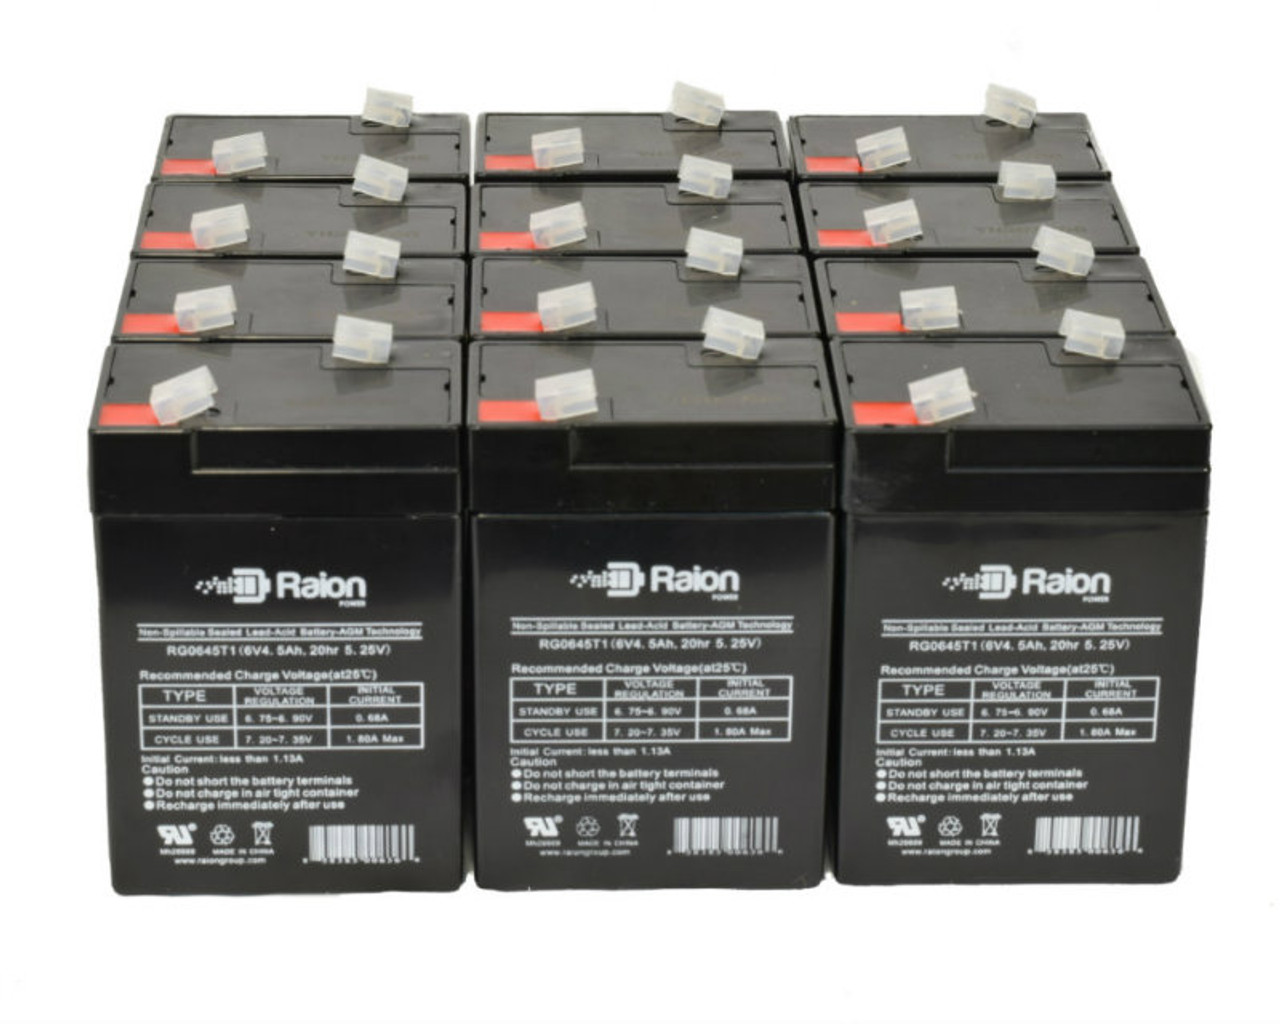 Raion Power 6 Volt 4.5Ah RG0645T1 Replacement Battery for Palma PM5A-6 - 12 Pack